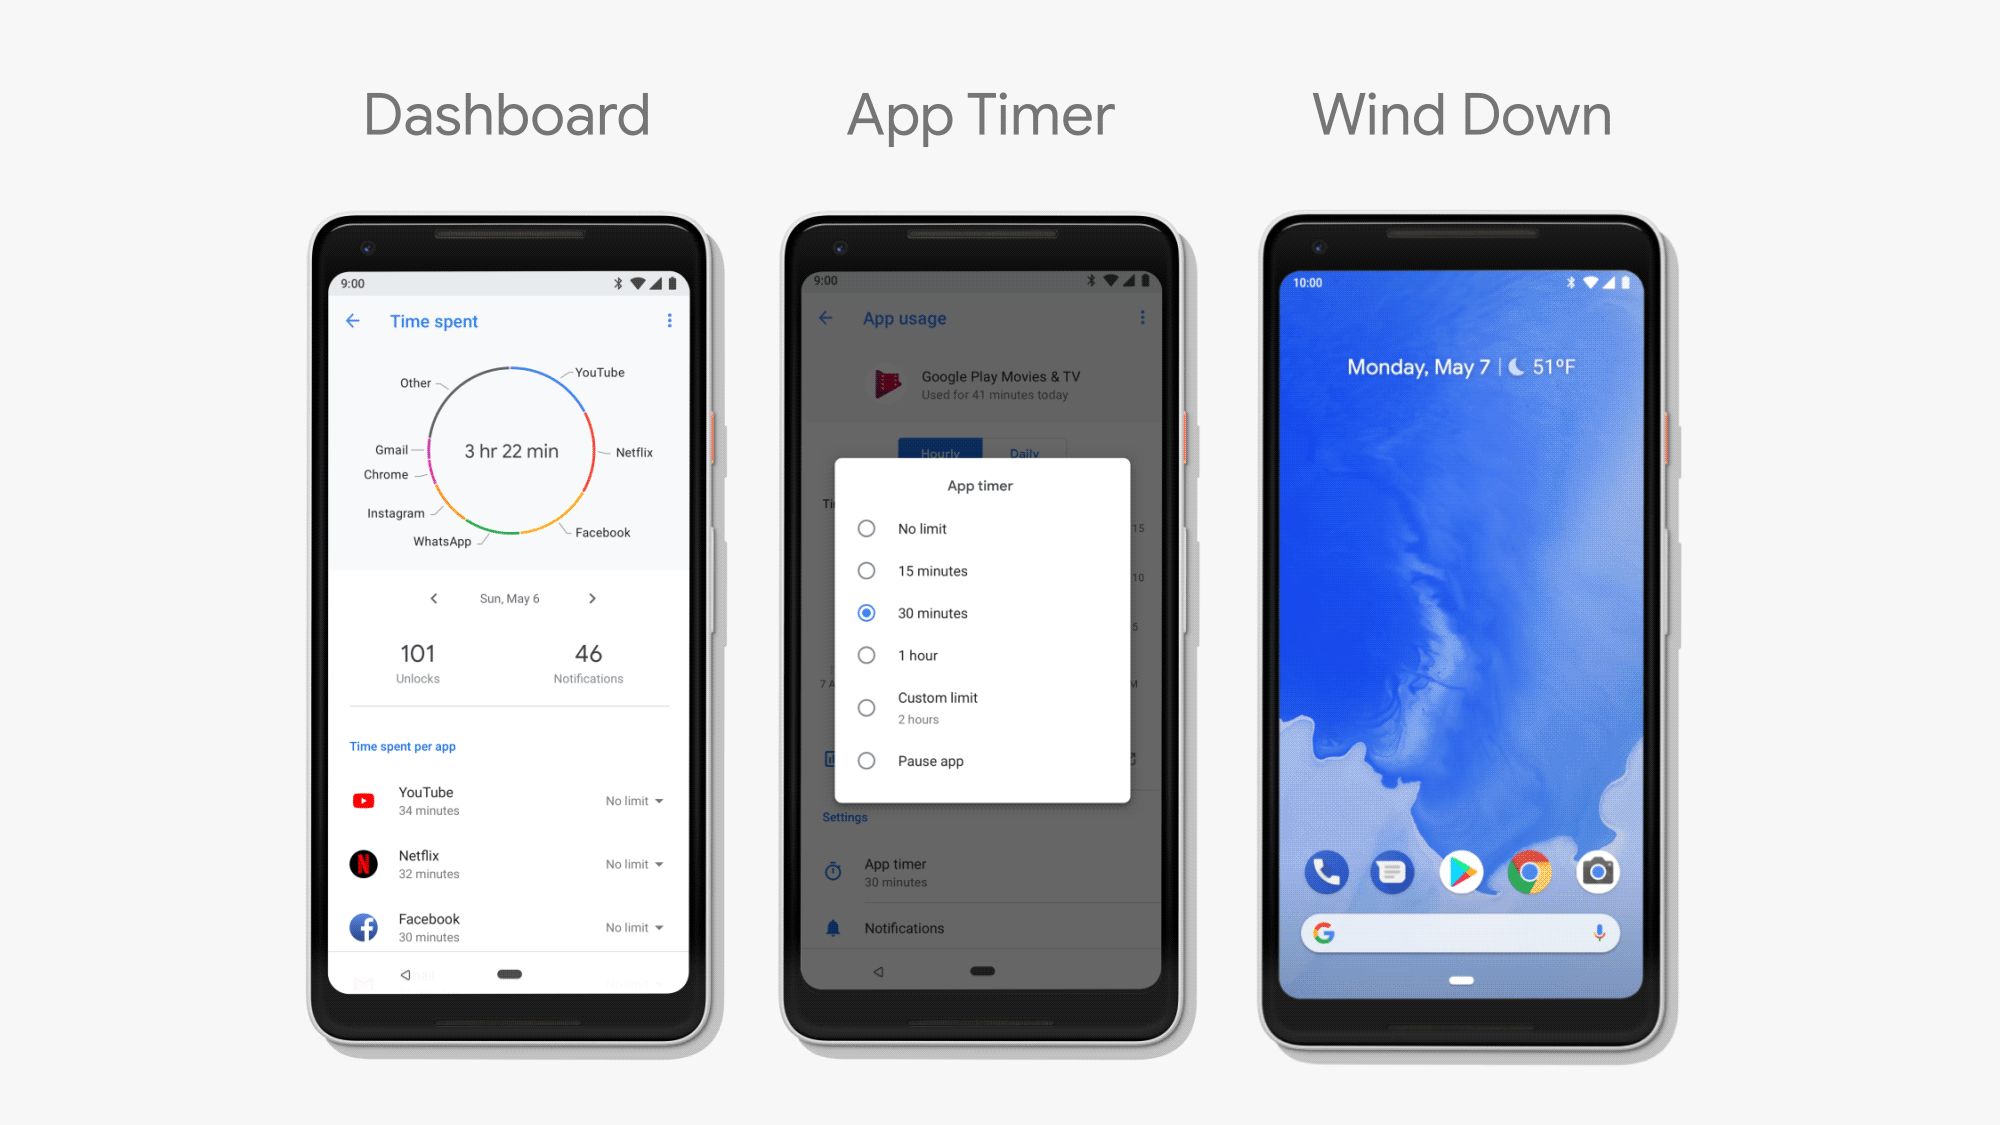 Google’s Android P will include a new Dashboard with phone usage stats, app timers, and a “wind down” mode that turns the display grayscale to discourage use.